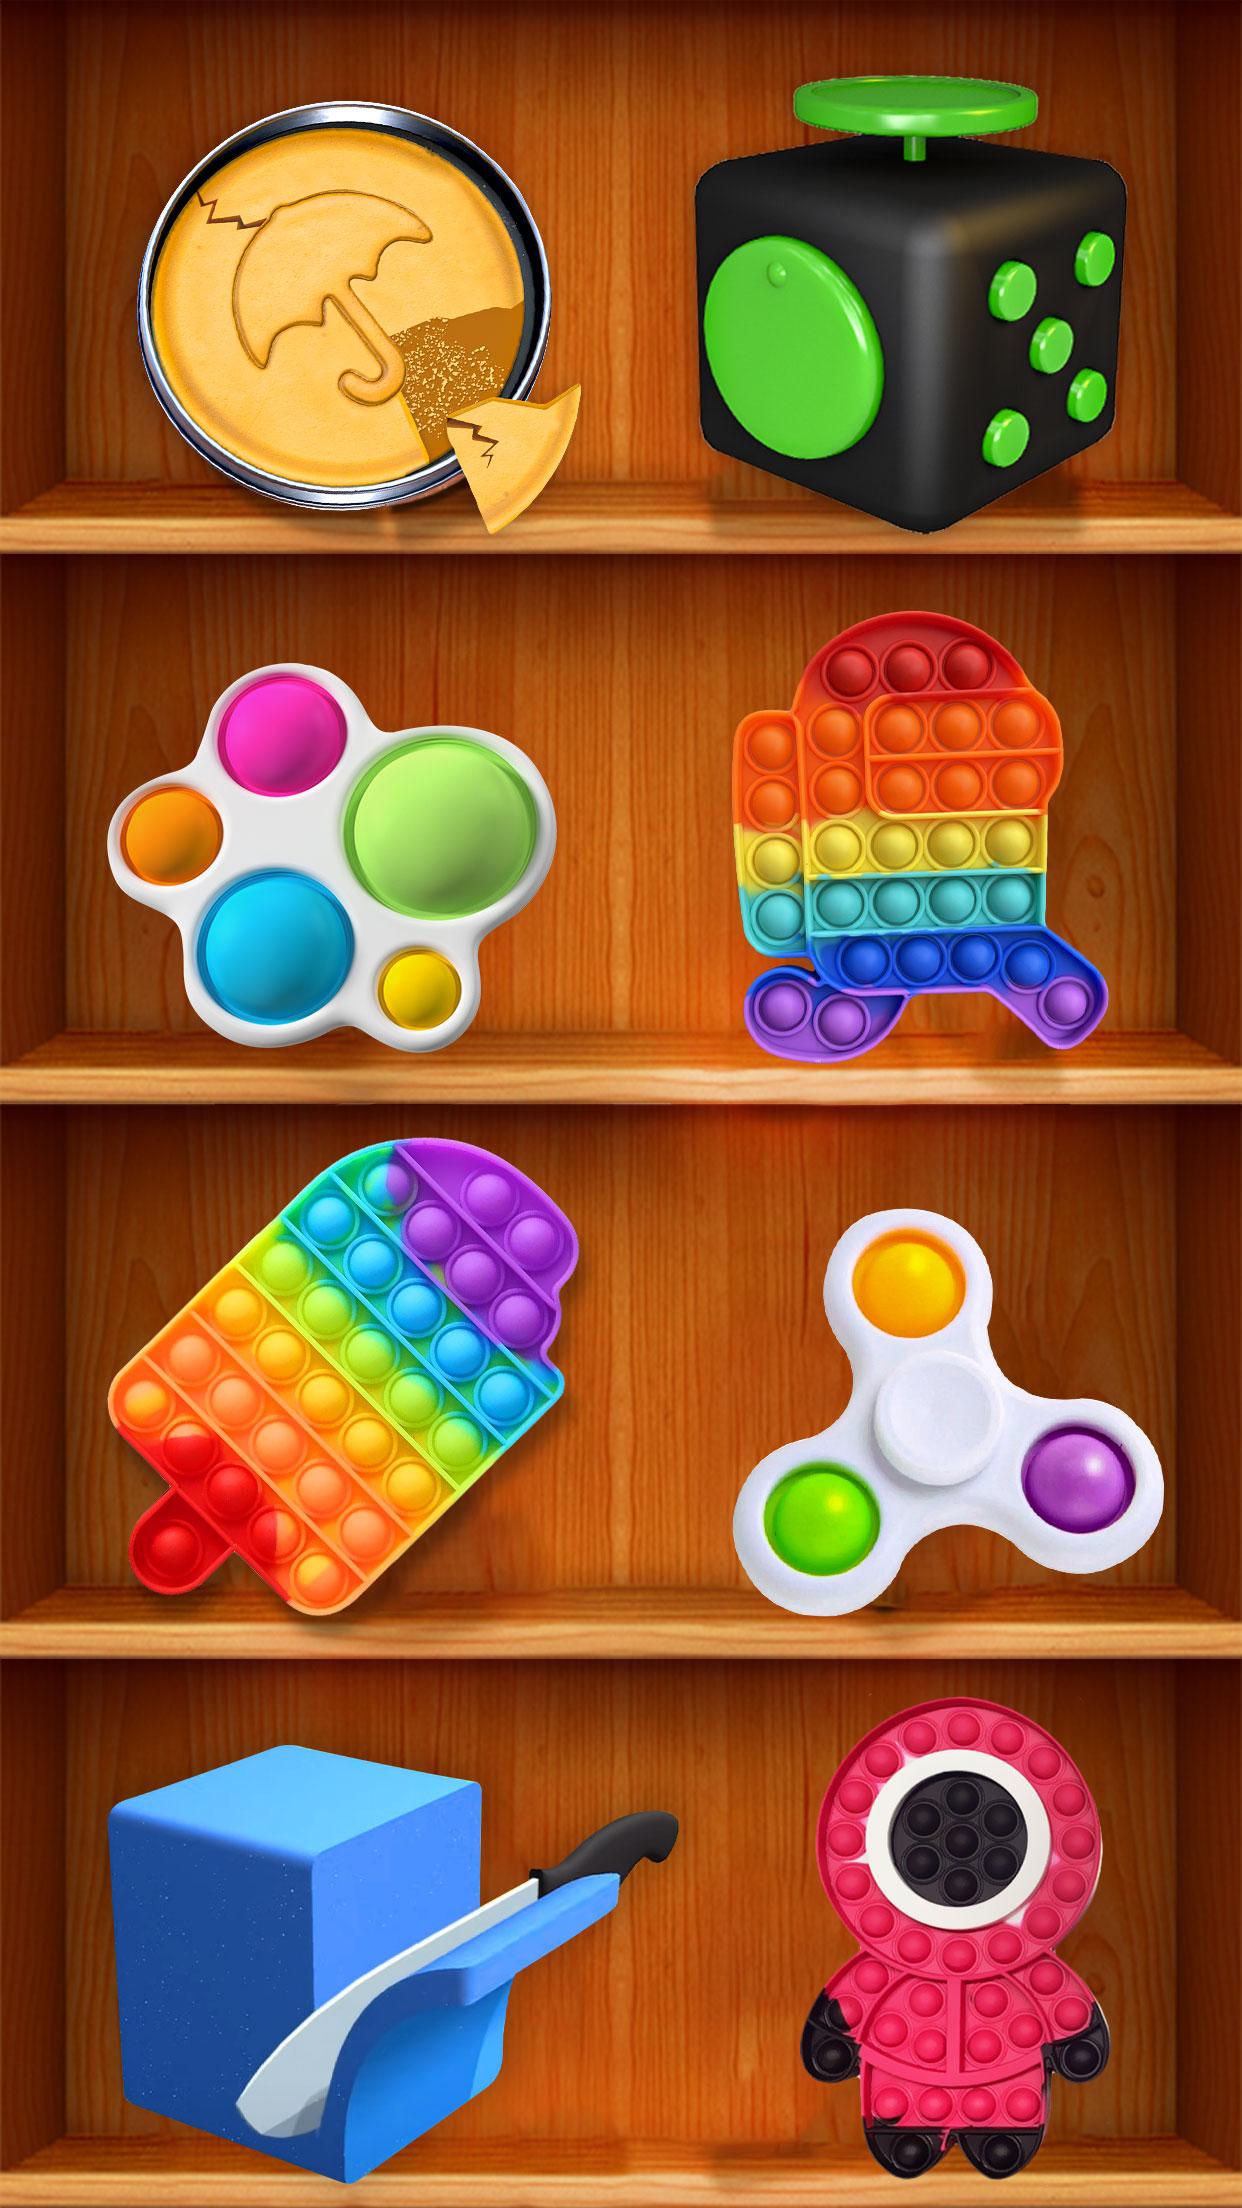 Fidget Toys 3D - Antistress Game for Android - Download